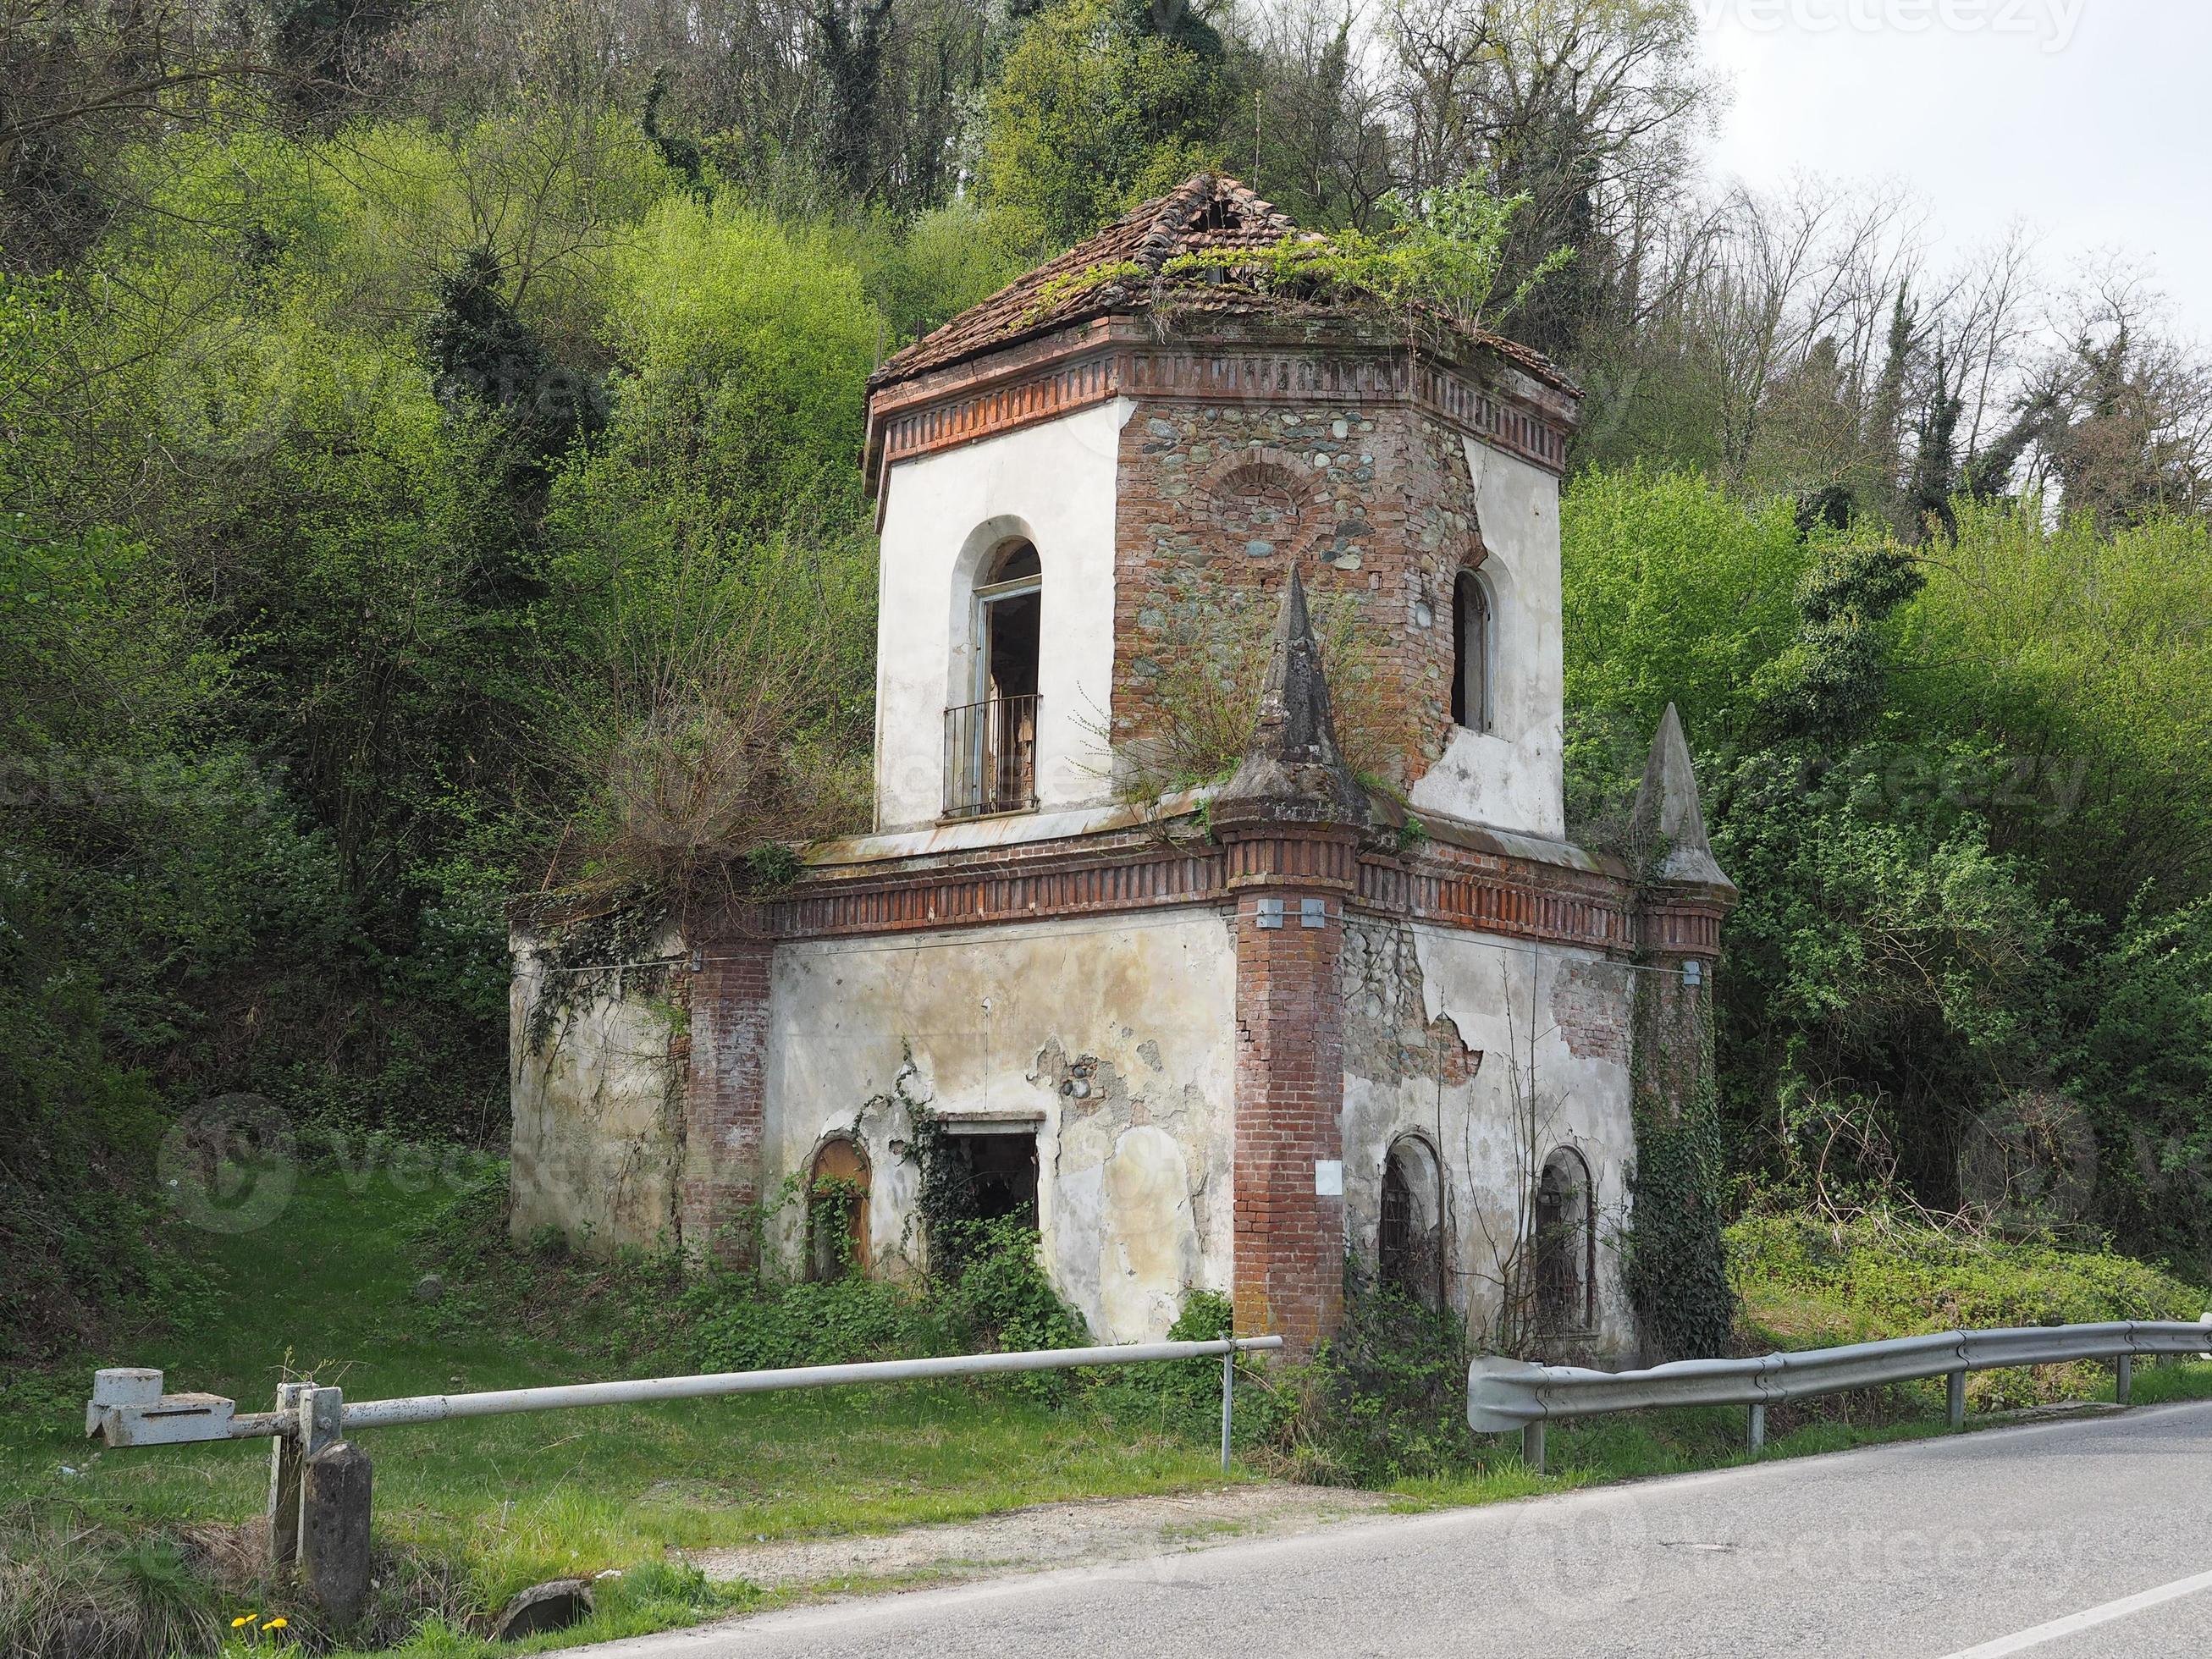 Ruins of gothic chapel in Chivasso, Italy photo